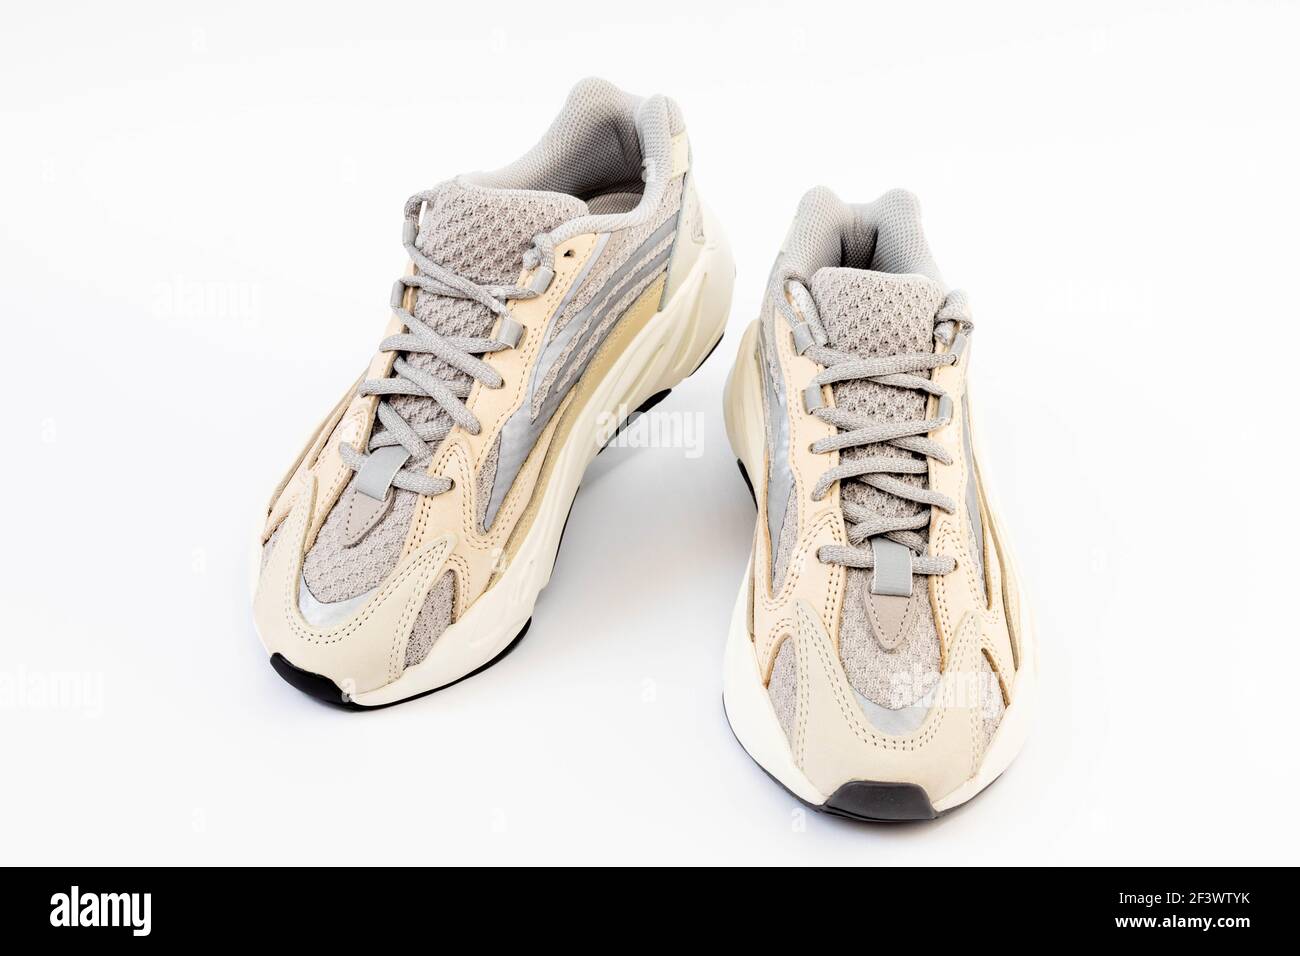 WARSAW, POLAND - Mar 16, 2021: Warsaw, PolAdidas Yeezy boost 700 V2 Cream.  Famous limited collection sneakers. Adidas running shoes isolated on a whit  Stock Photo - Alamy